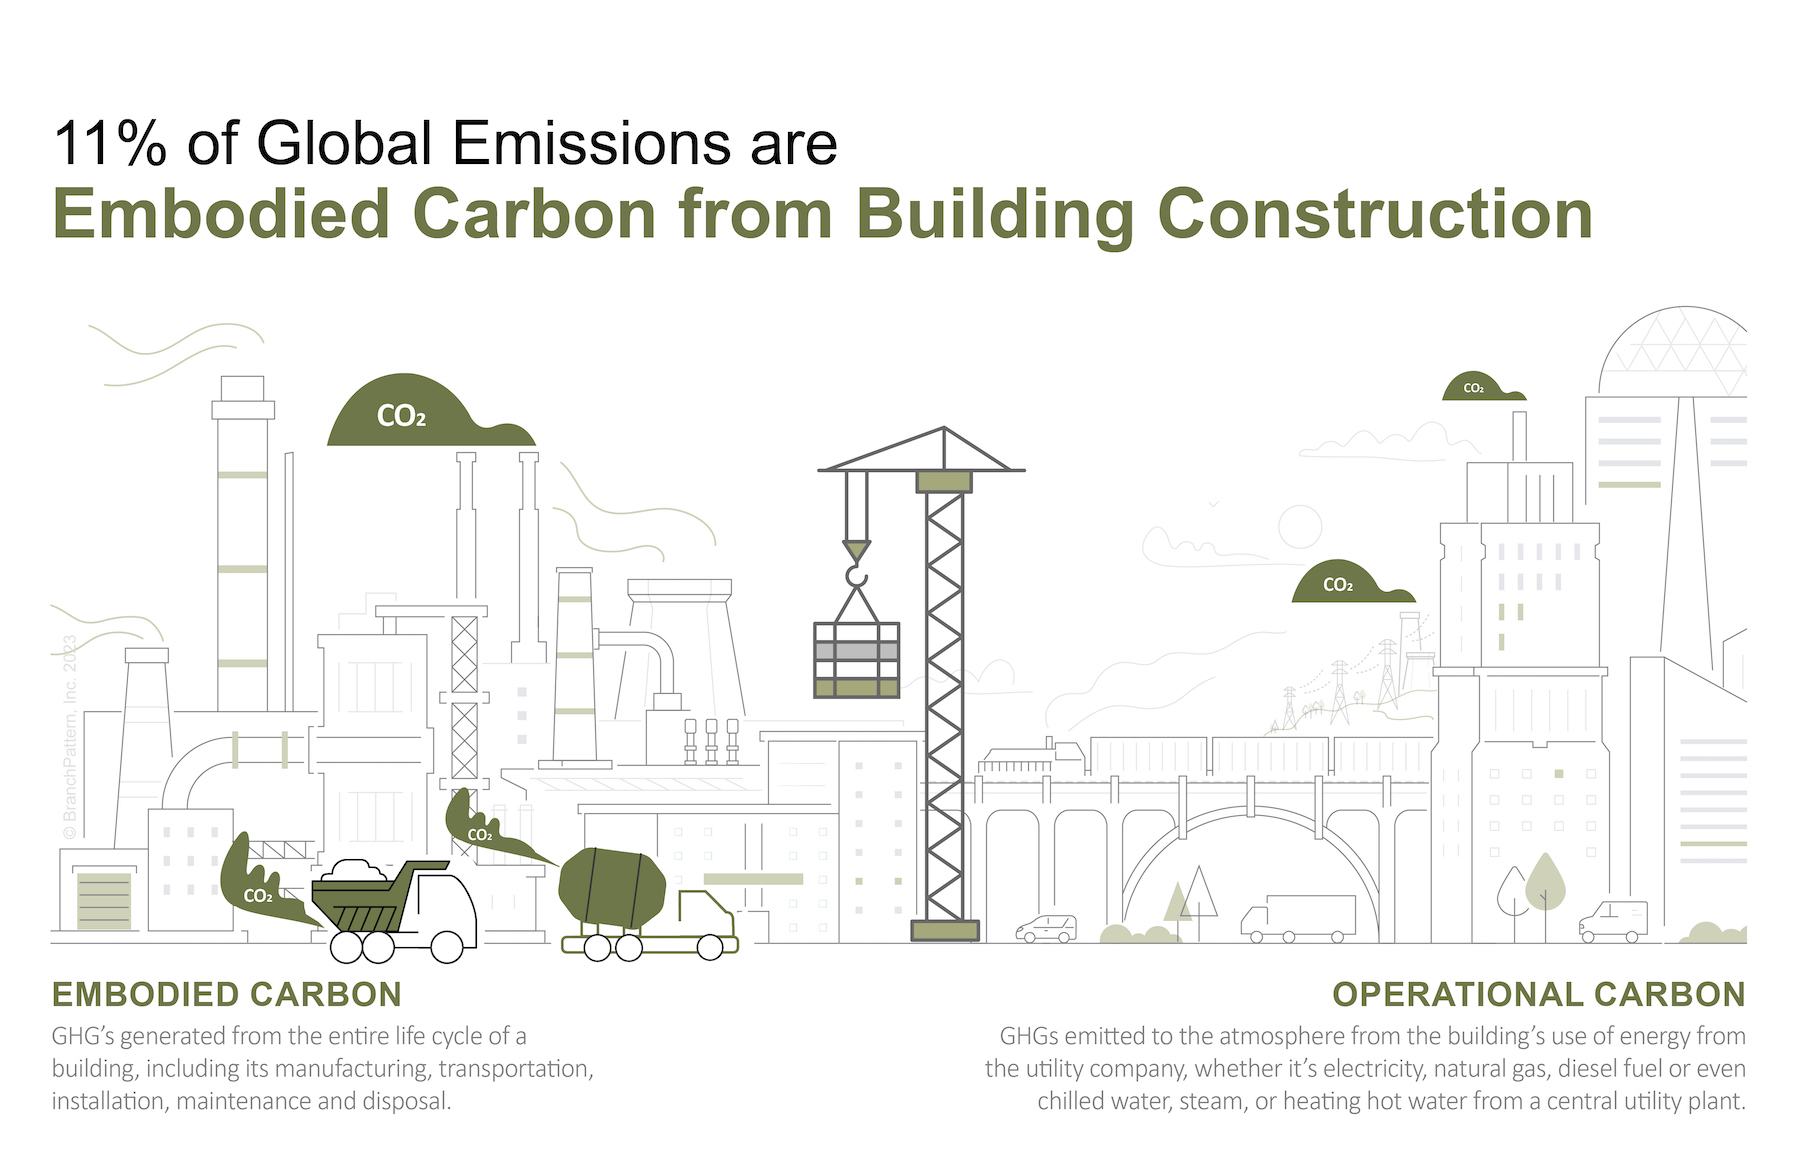 An estimated 11% of global greenhouse gases come from the embodied carbon from building construction. But there has been relatively little EC measurement in industrial buildings. Charts: BranchPattern